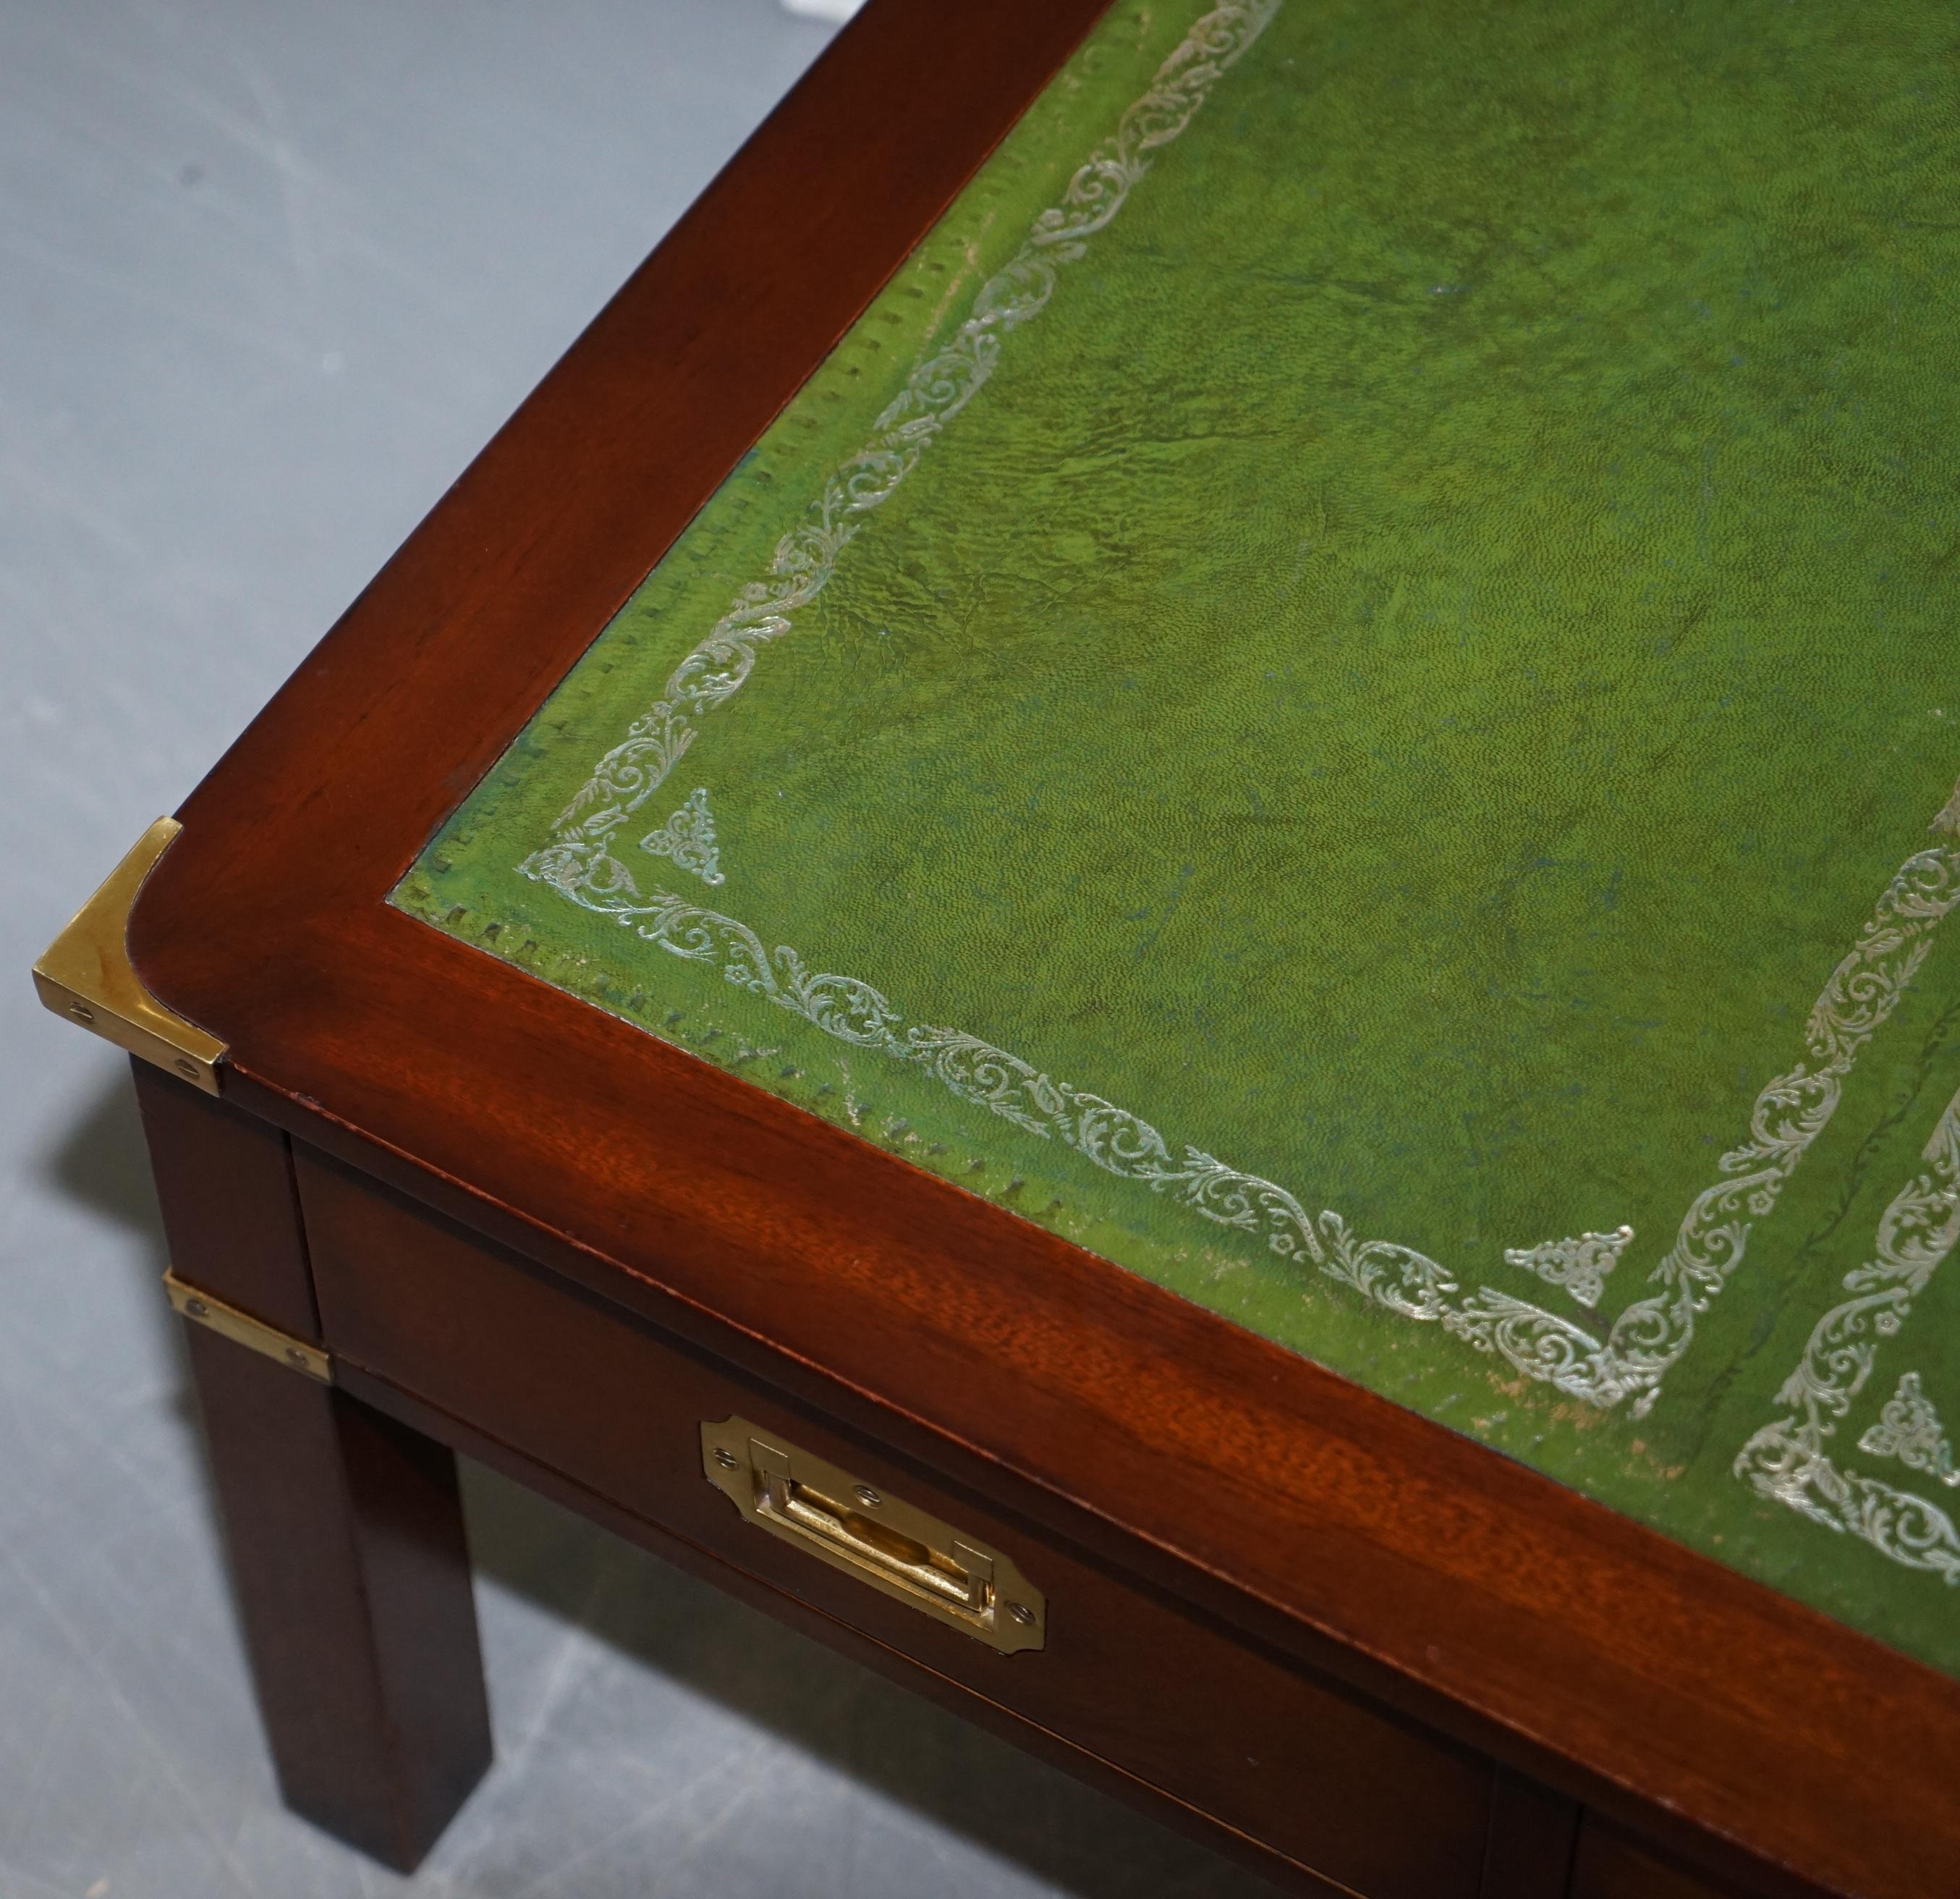 Harrods Kennedy Military Campaign Hardwood Coffee Table Green Leather Surface 2